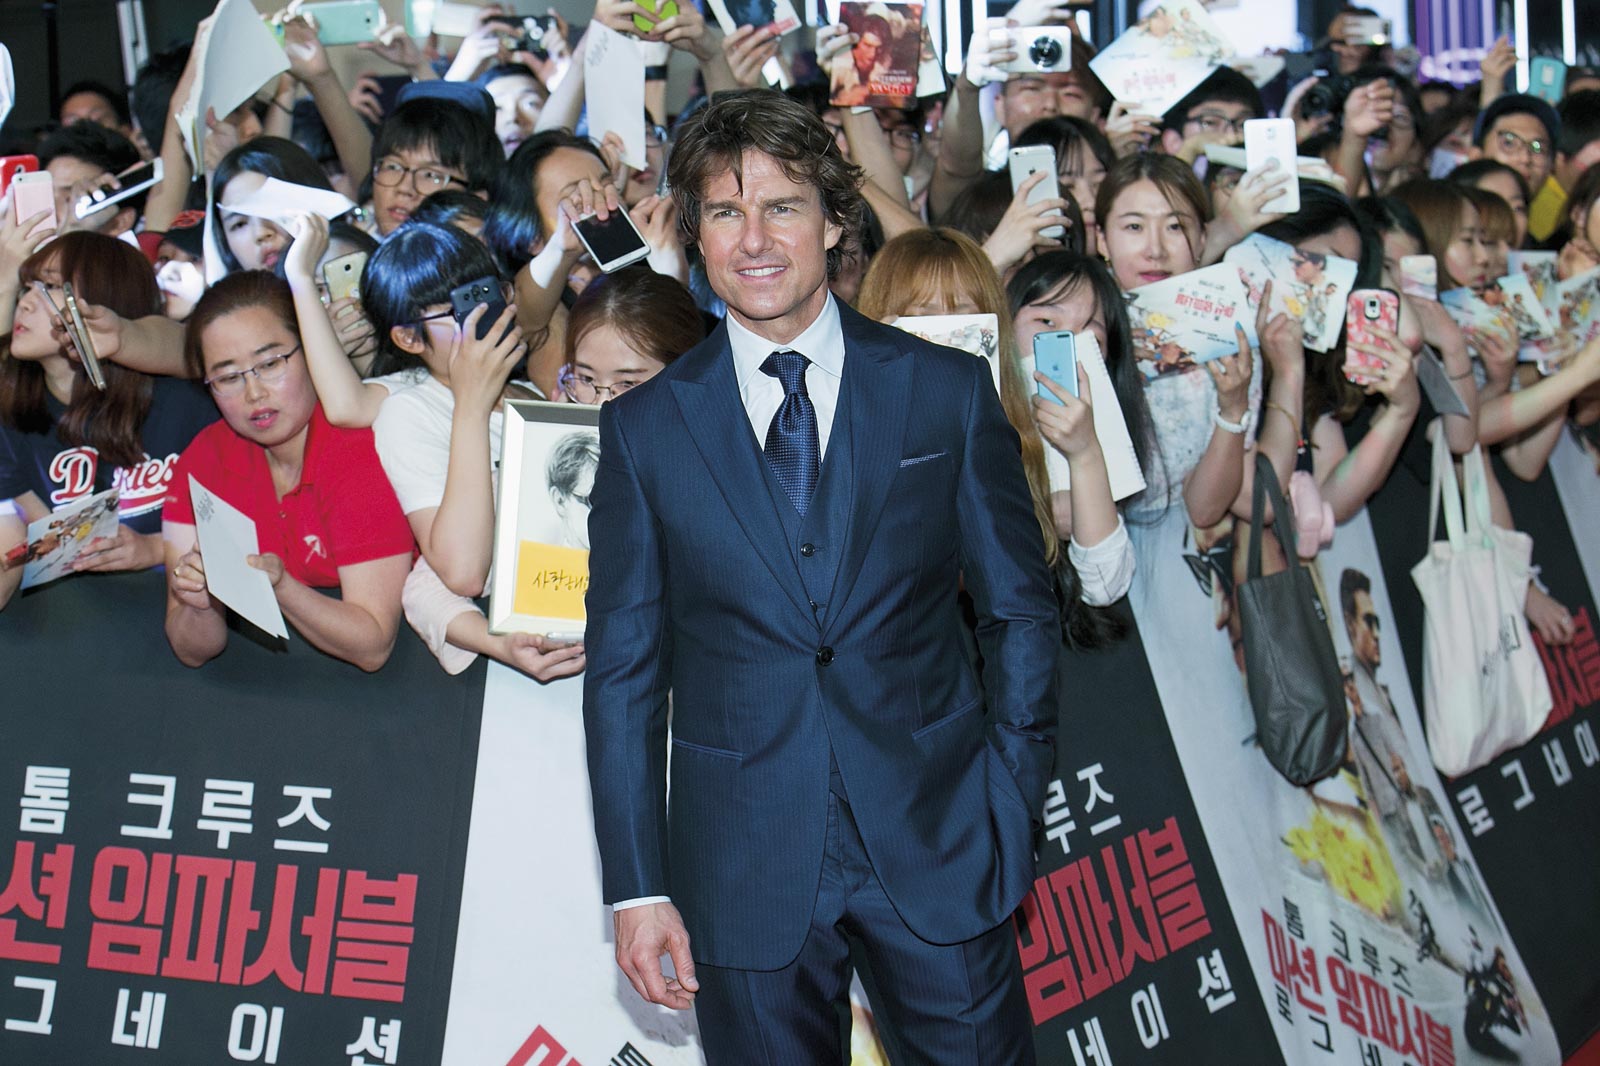 Tom Cruise "Mission Impossible - Rogue Nation" Seoul Premiere